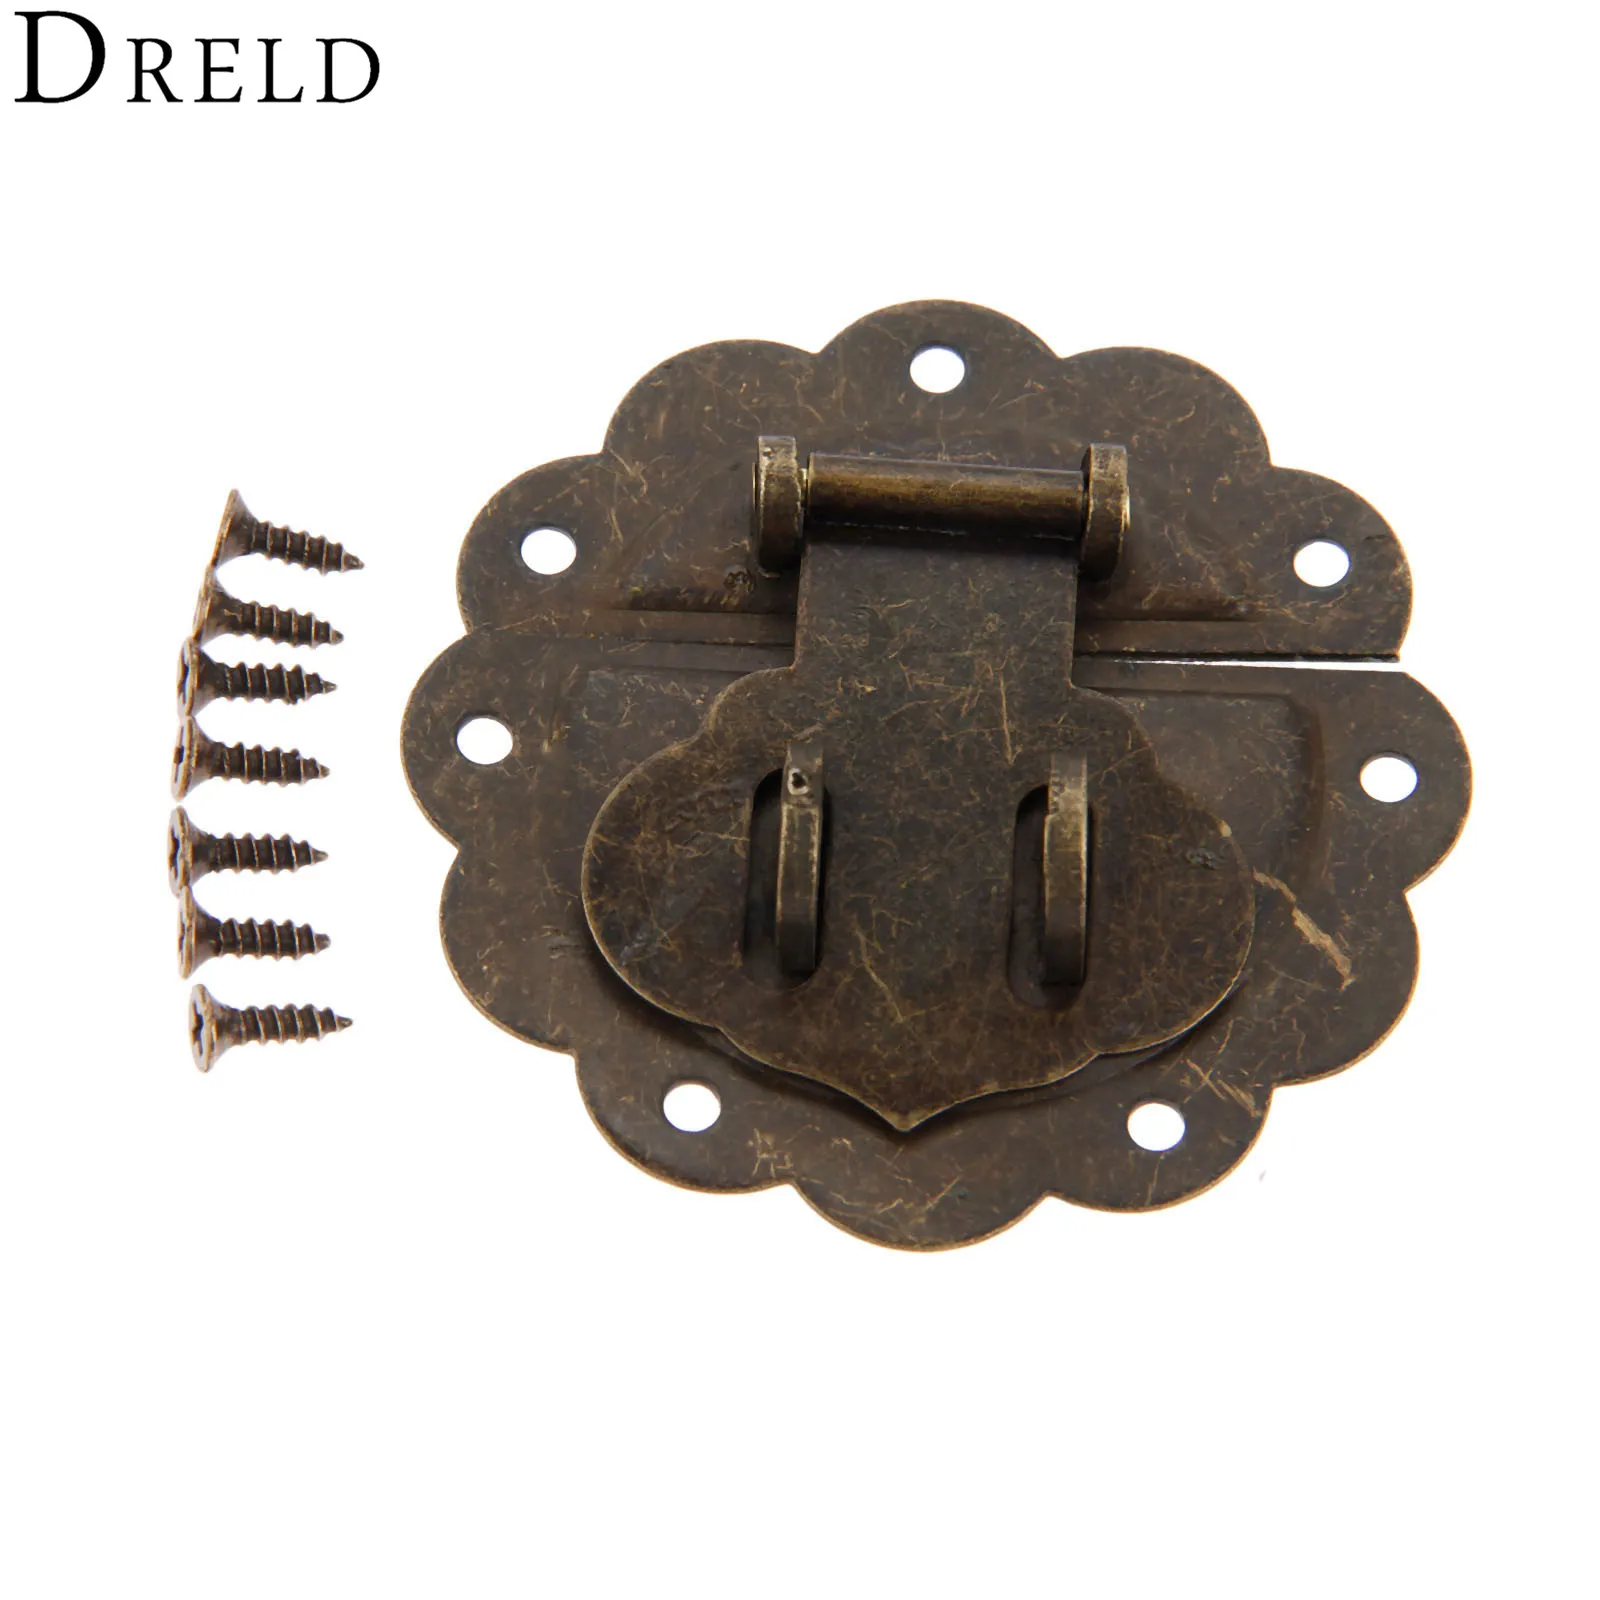 

DRELD 58mm Wood Box Hasp Drawer Latches Lock Catch for Jewelry Box Suitcase Buckle Clip Clasp Furniture Hardware Antique Bronze